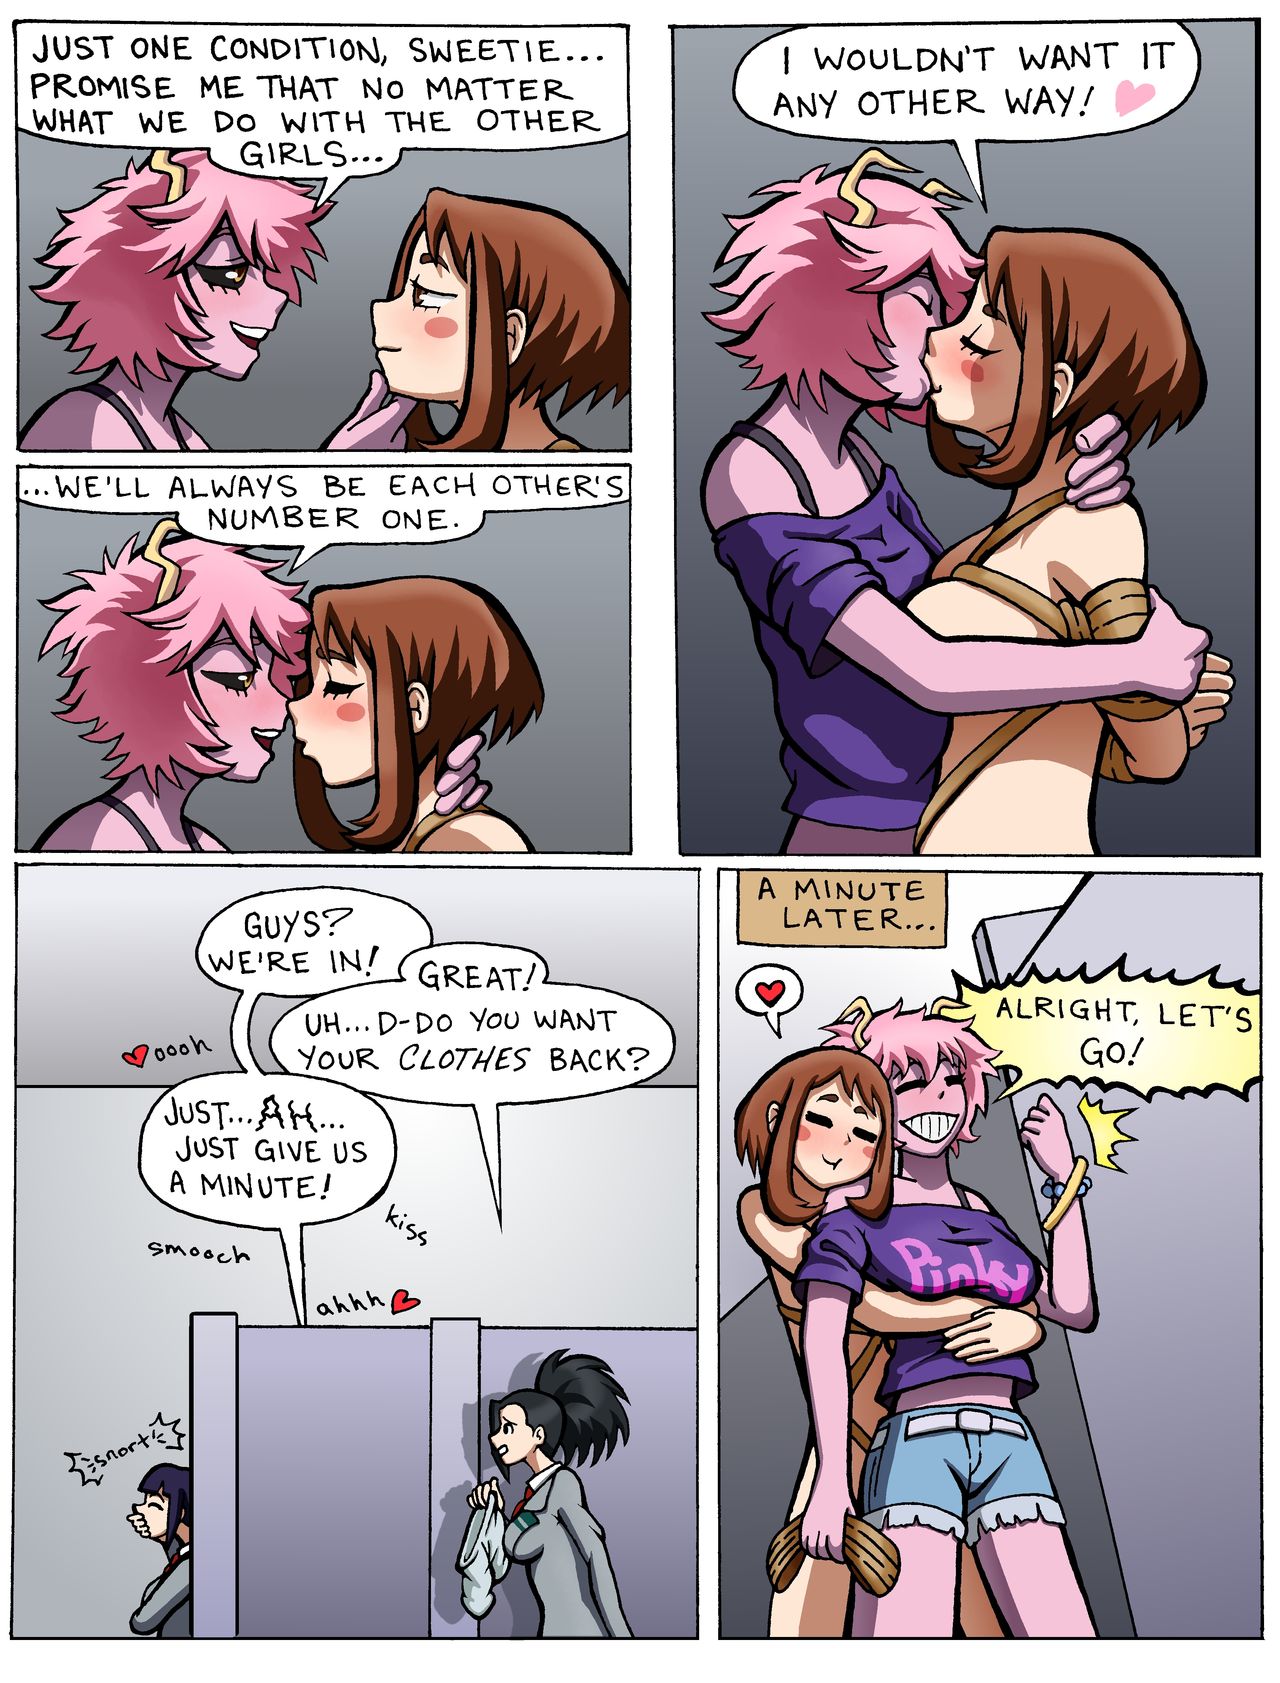 Kinks and quirks porn comic 2